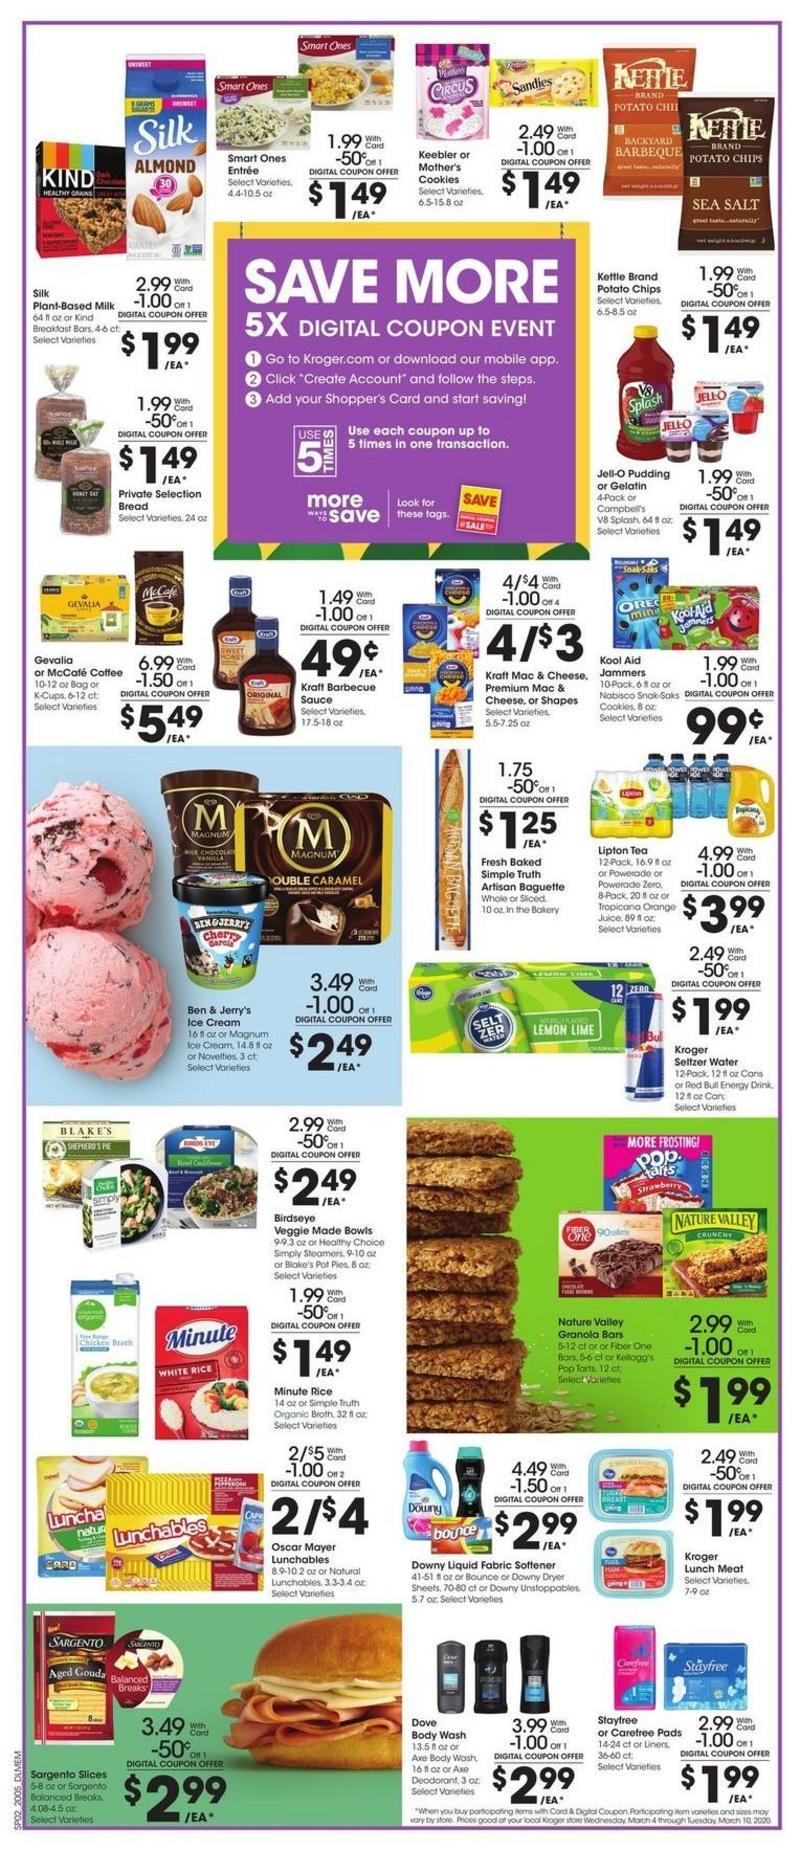 Kroger Weekly Ad from March 4